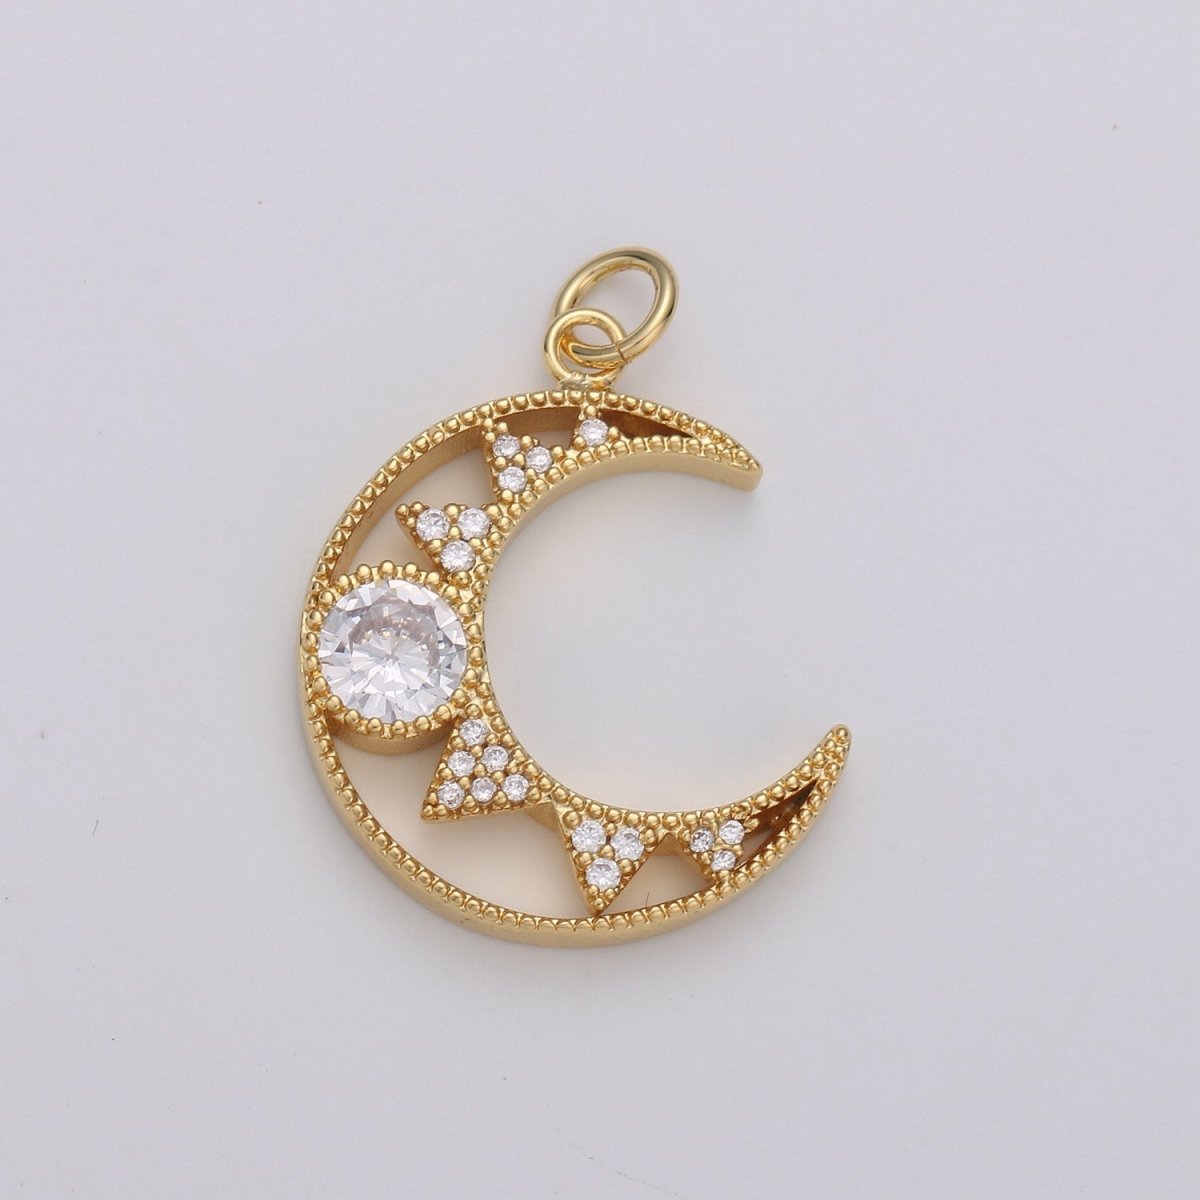 24k Gold Filled Micro Pave Crescent Moon Charm, Cubic Zirconia Moon Pendant Charm, Gold Filled Charm, For DIY Jewelry D-113 - DLUXCA